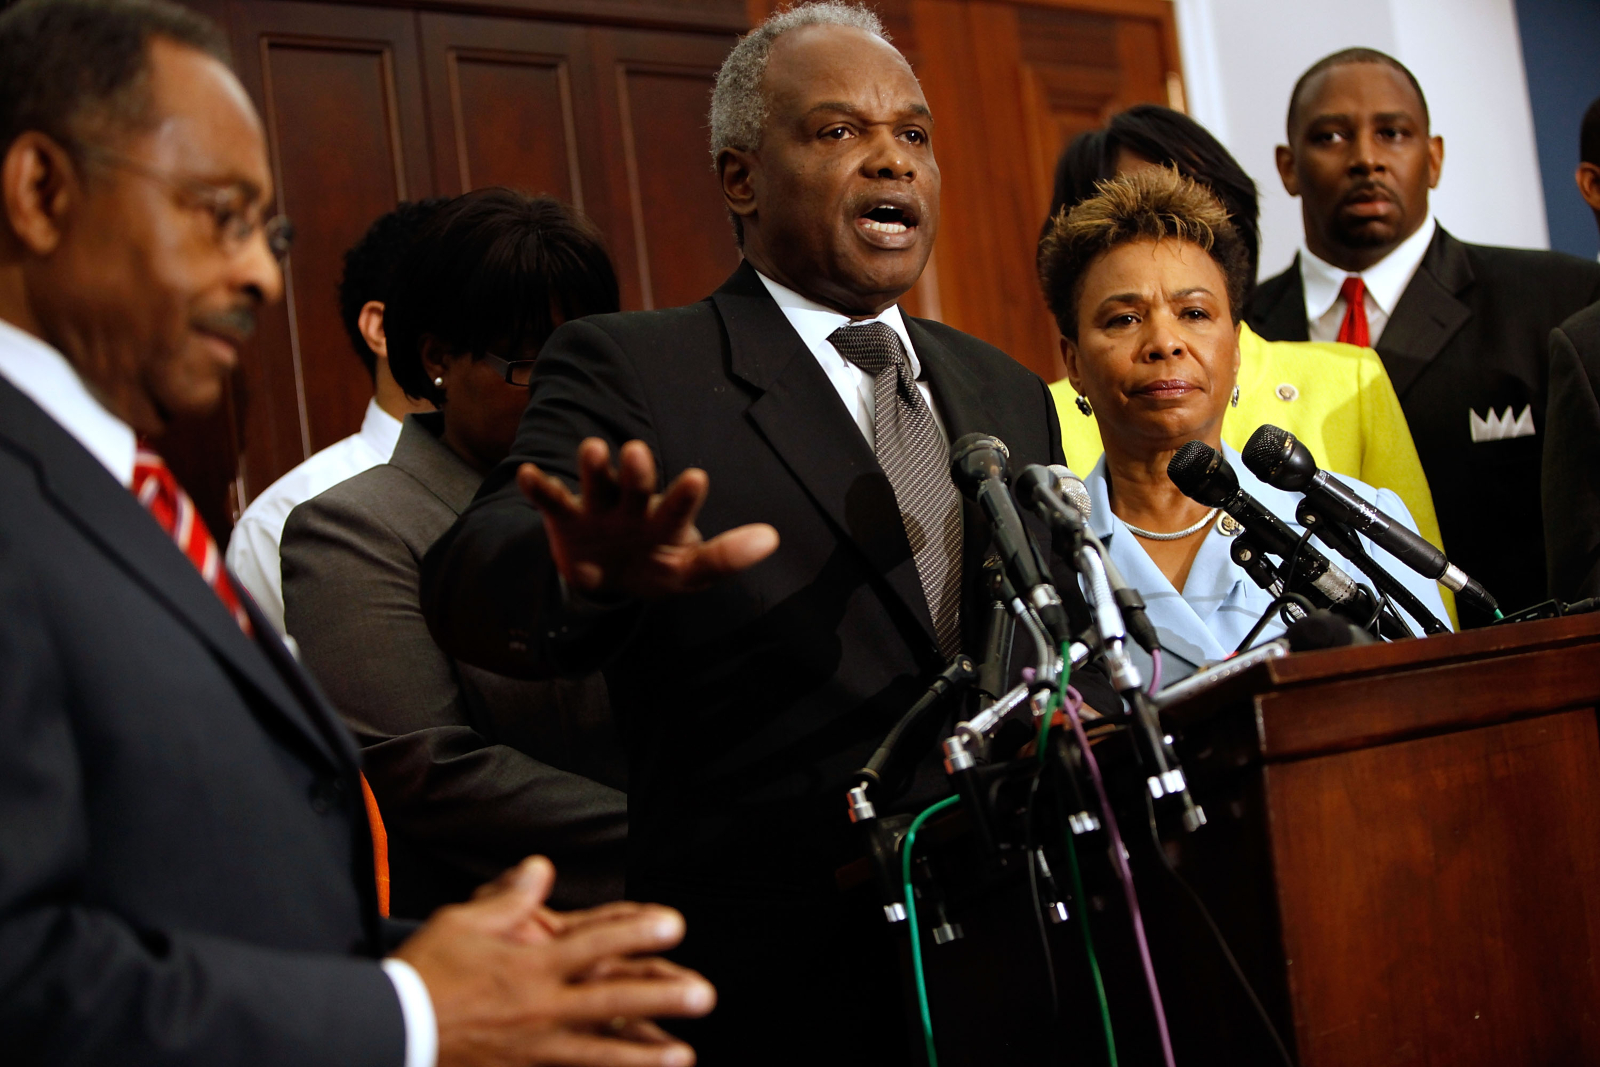 A Black man with short, gray hair speaks into a group of microphones on a podium. He is surrounded by other Black people wearing formal suits and clothing.